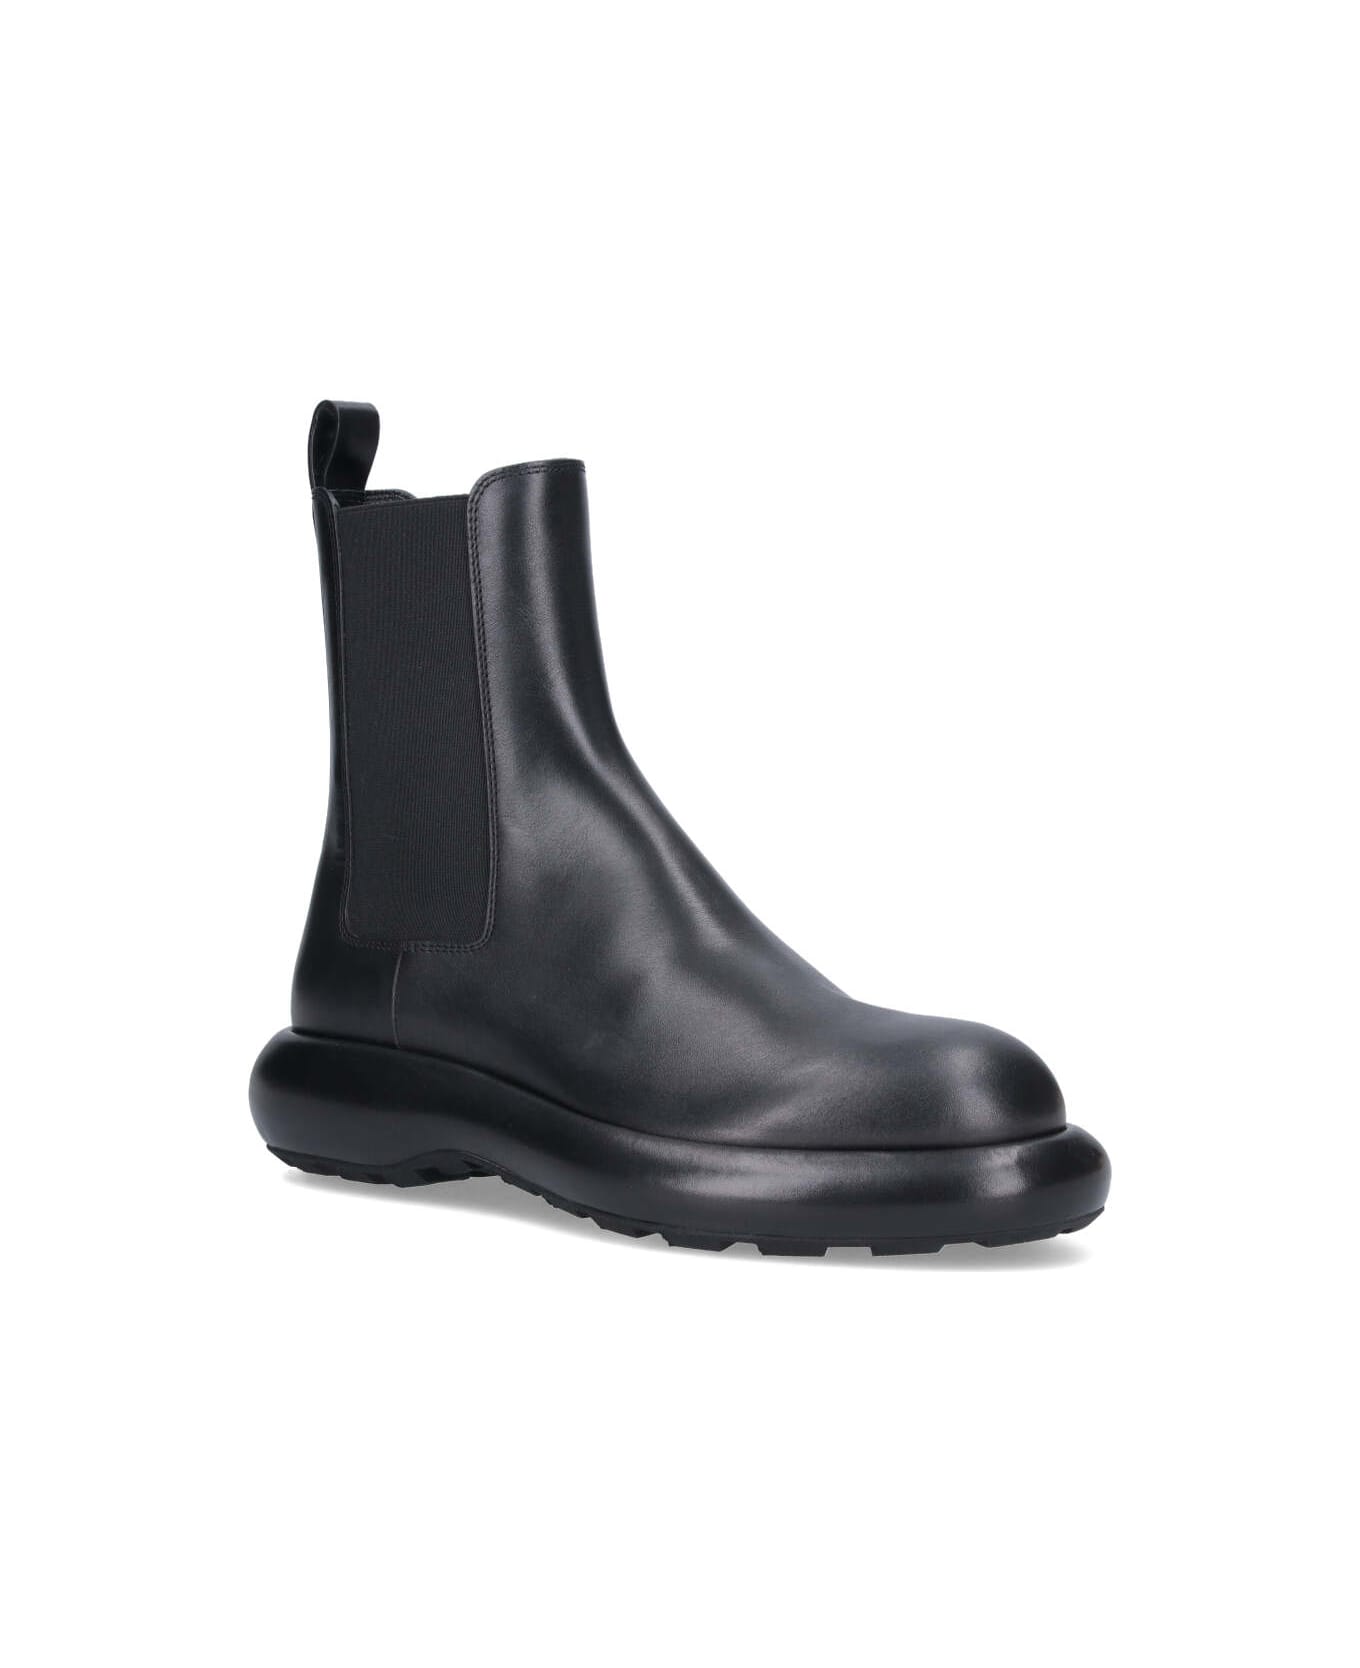 Jil Sander Chelsea Ankle Boots - 001 ブーツ